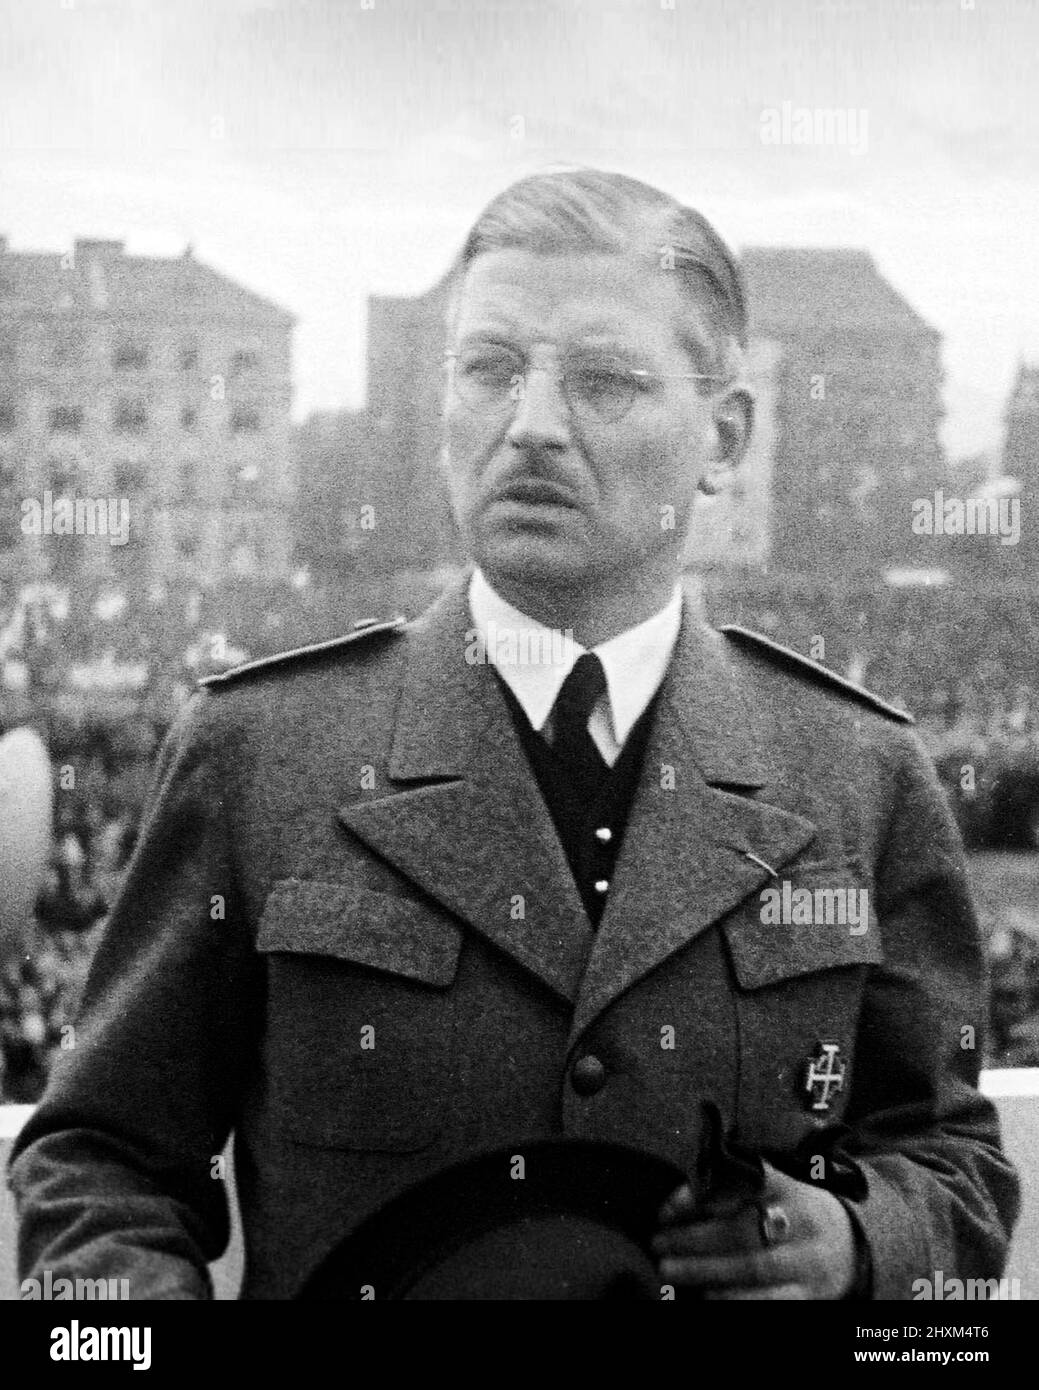 Chancellor Schuschnigg at an Austrian Fatherland Front rally, probably the proclamation of Chancellor Schuschnigg as Front fuehrer on October 10th 1936 Stock Photo